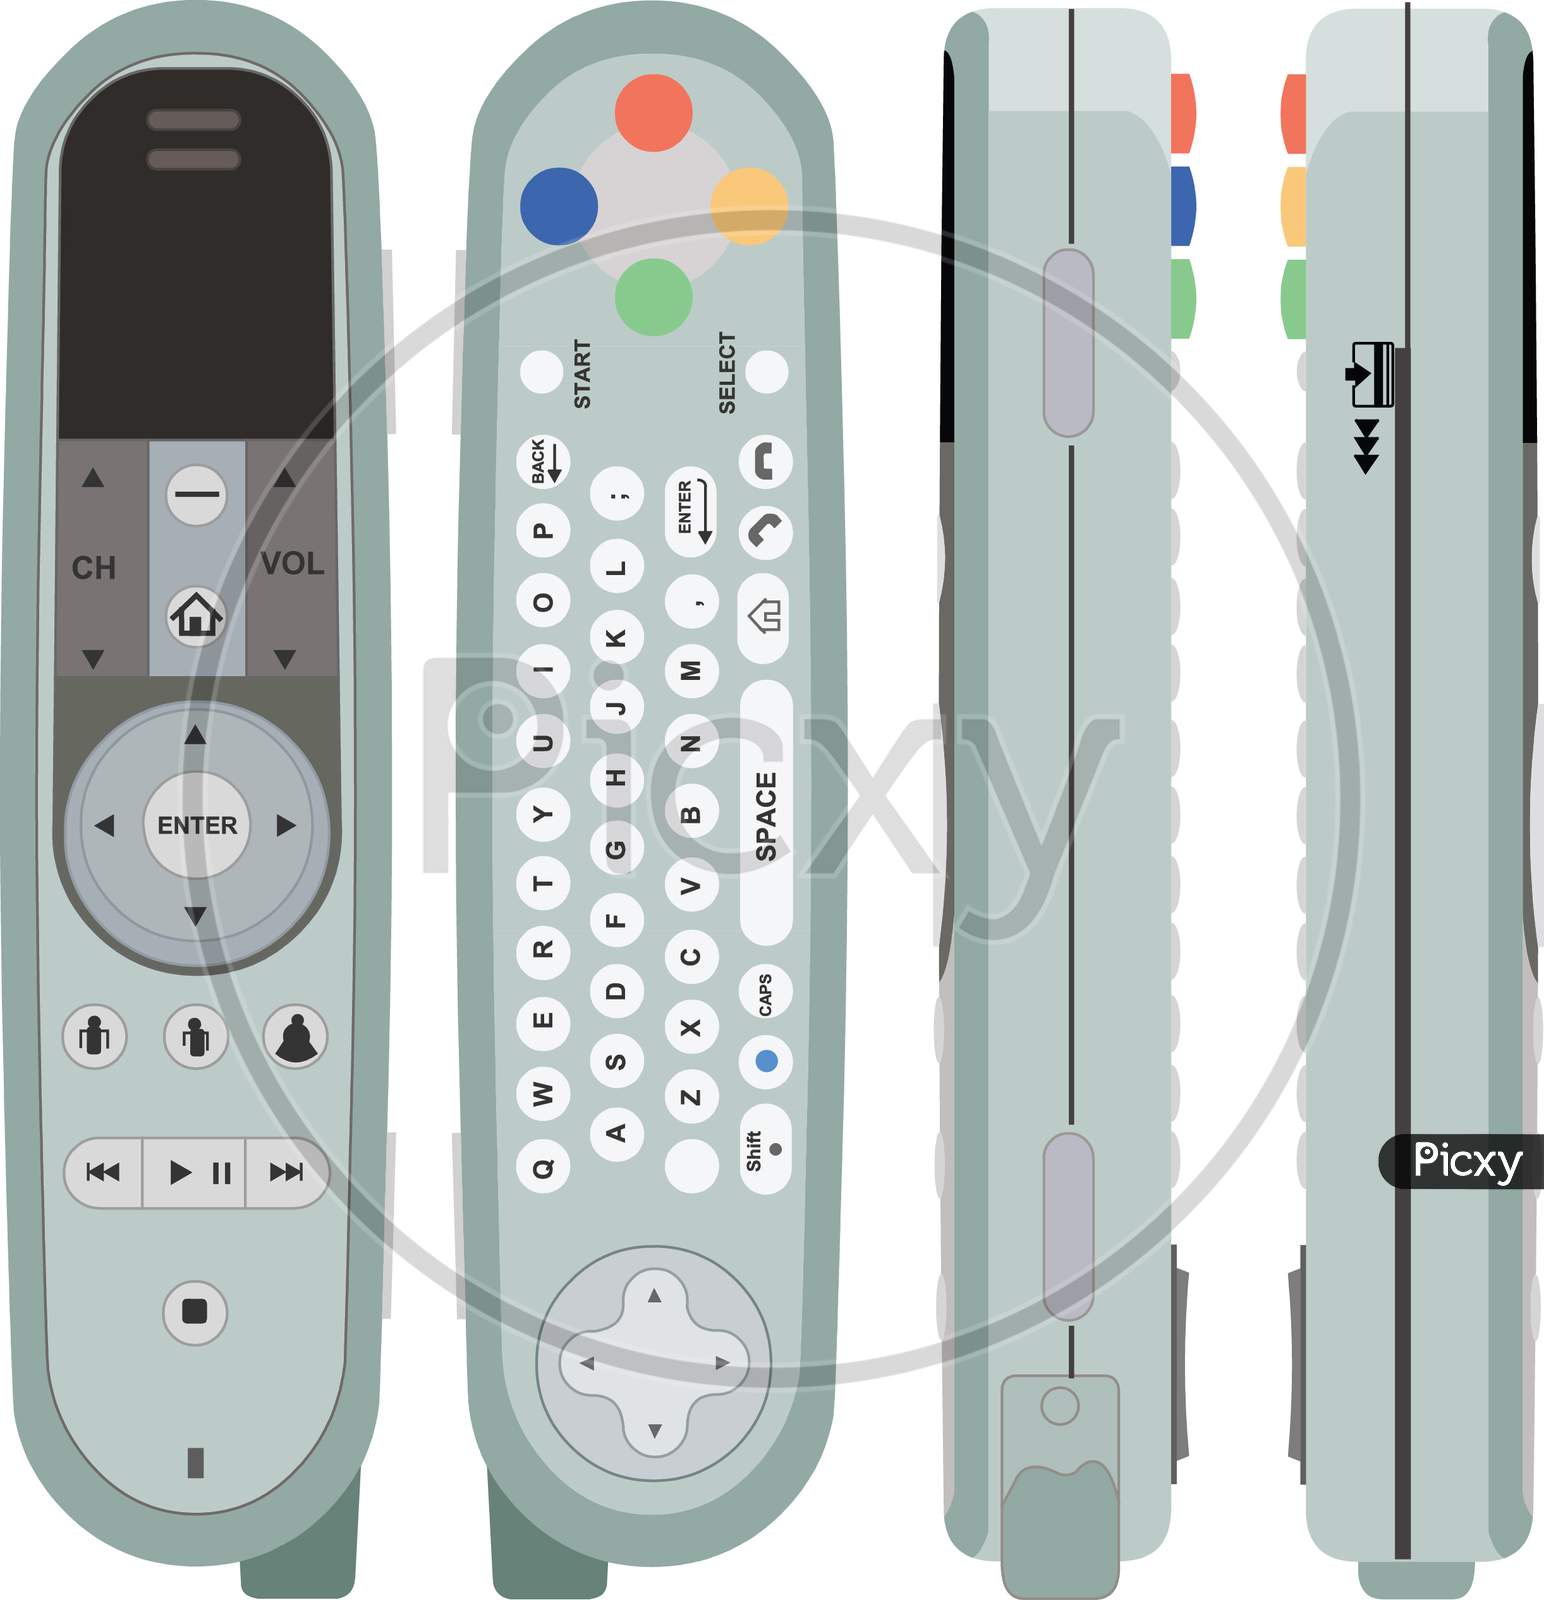 Vector of Remote from different angle, isolated on white background.